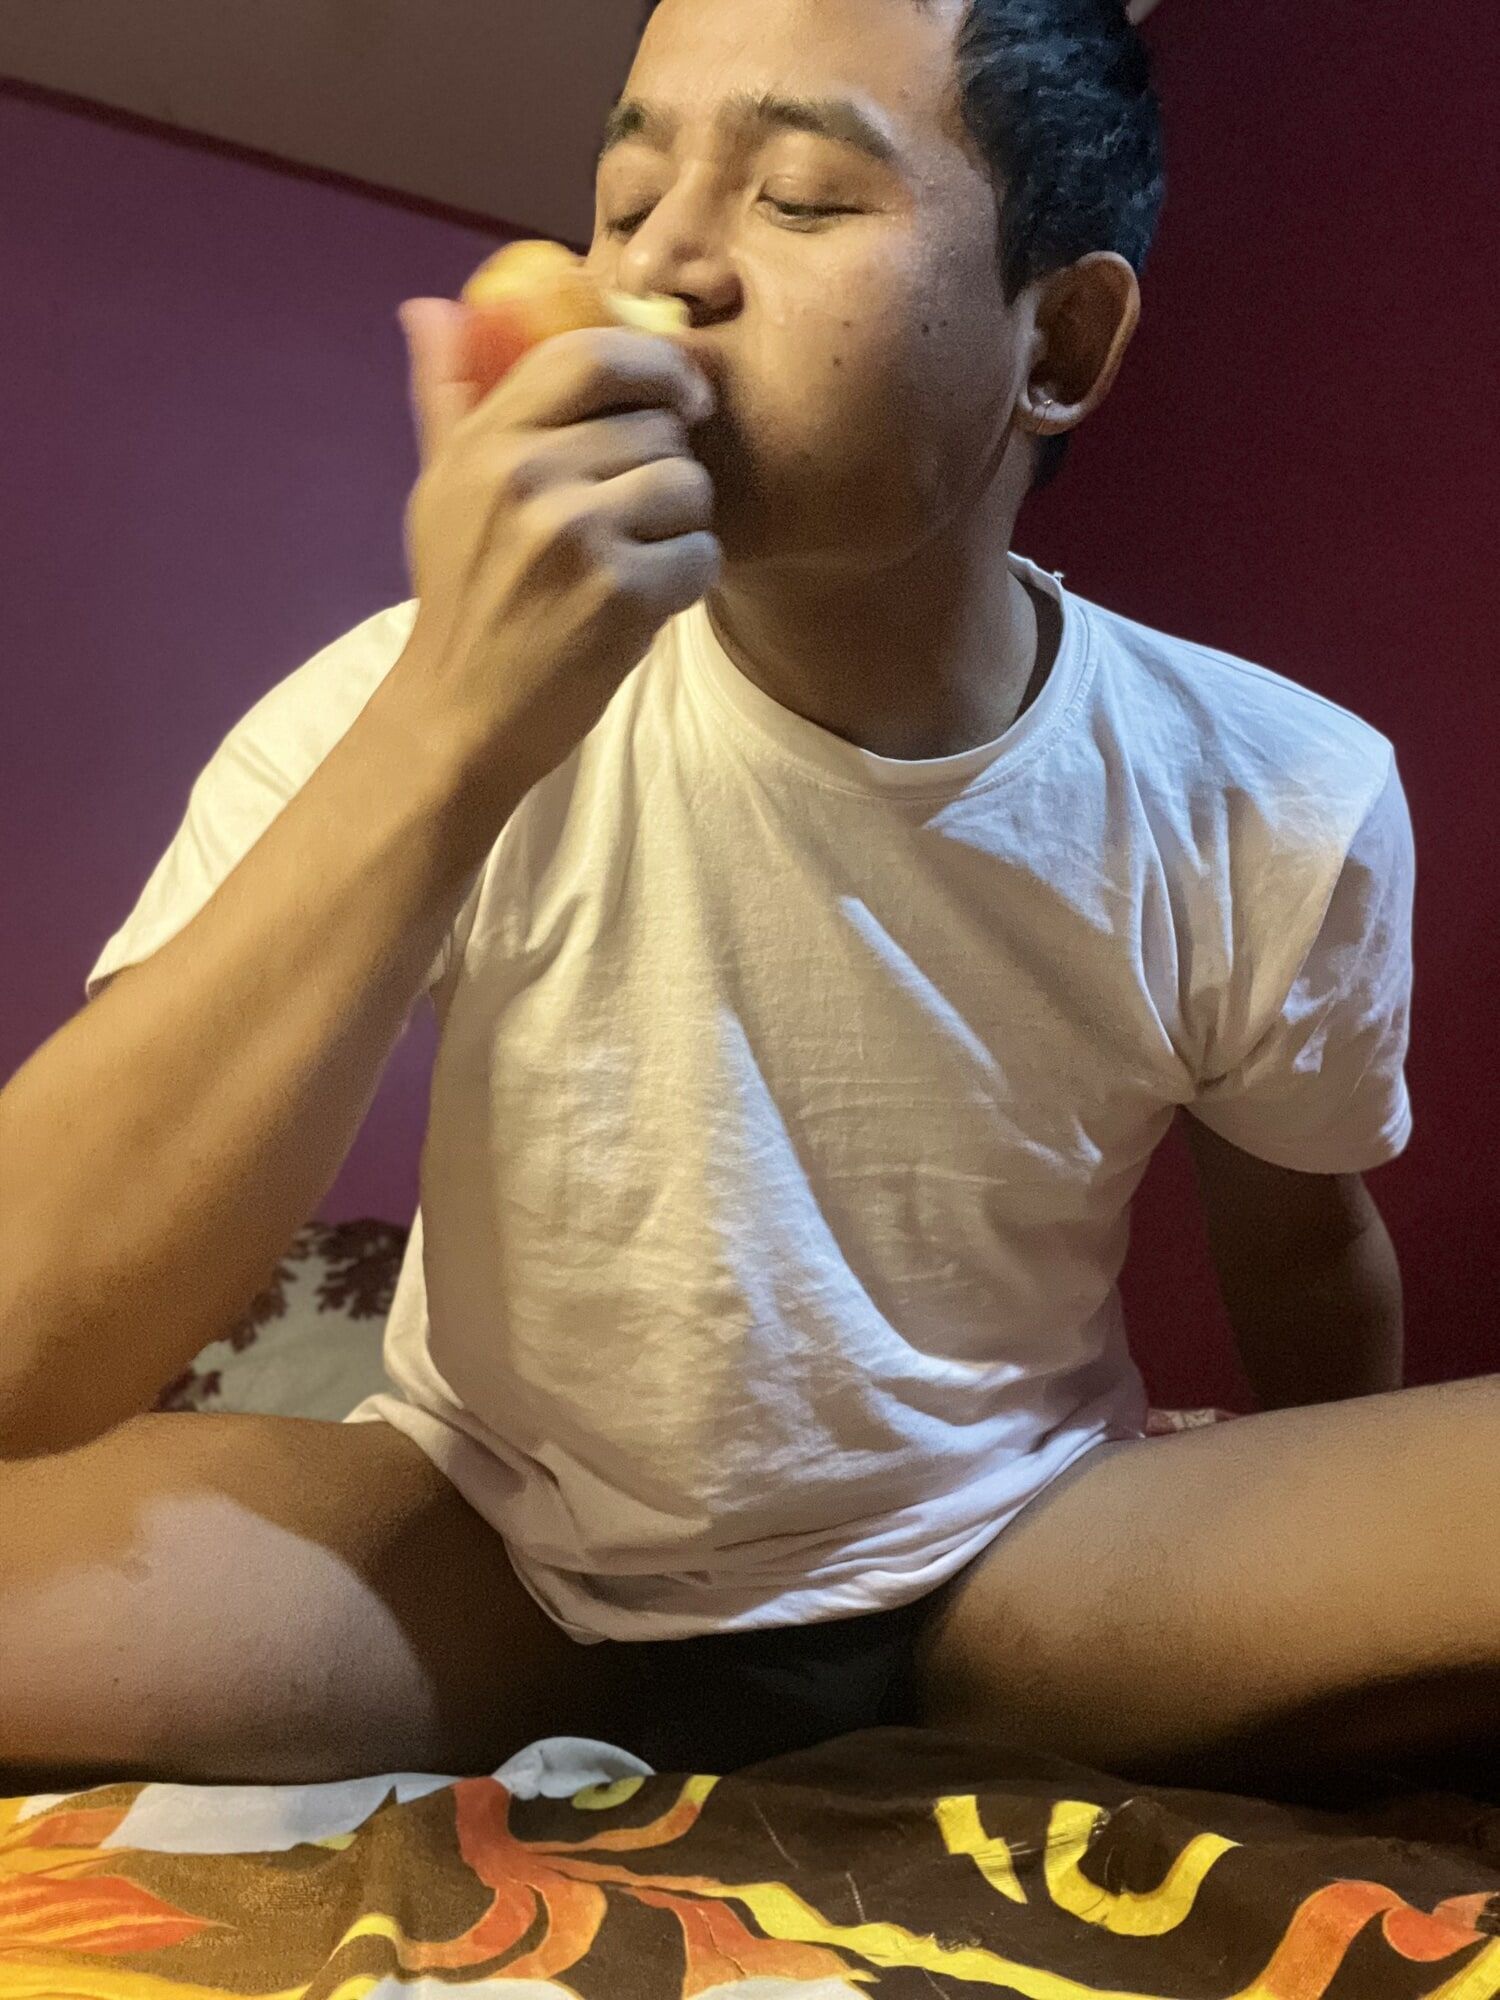 Baby Asian Twink cute nude. #2